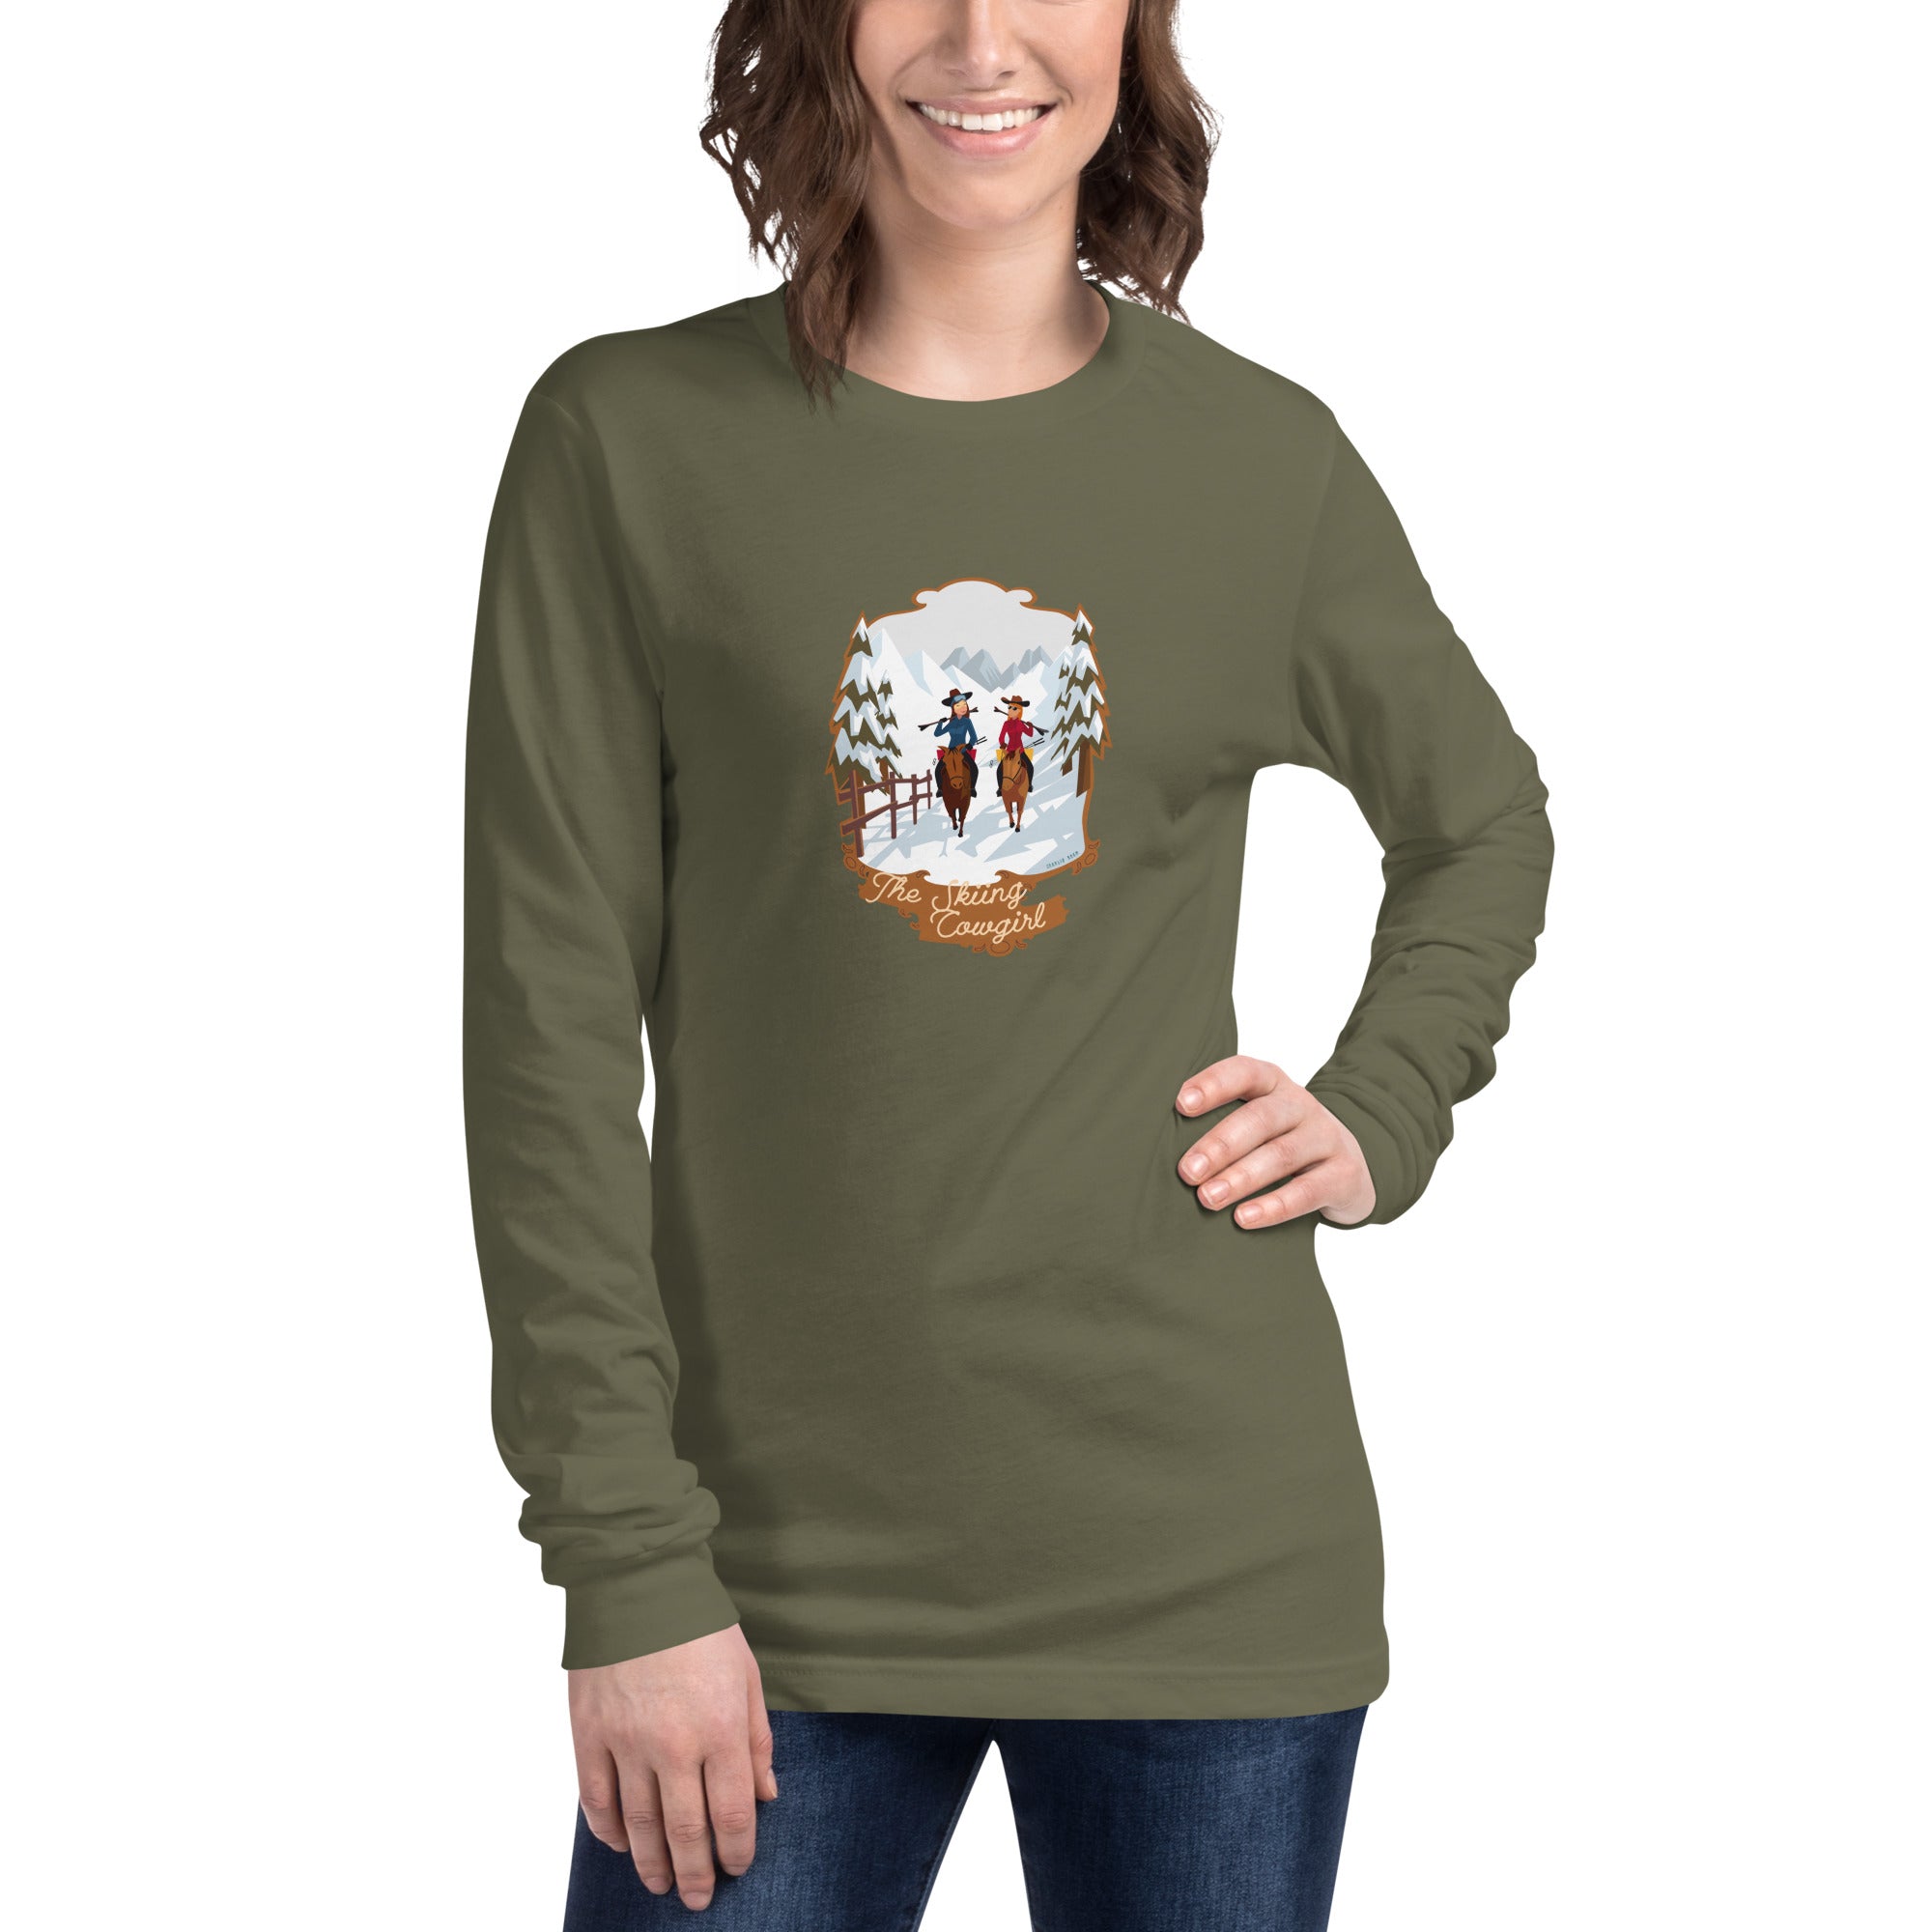 T-shirt unisexe à manches longues The Skiing Cowgirl